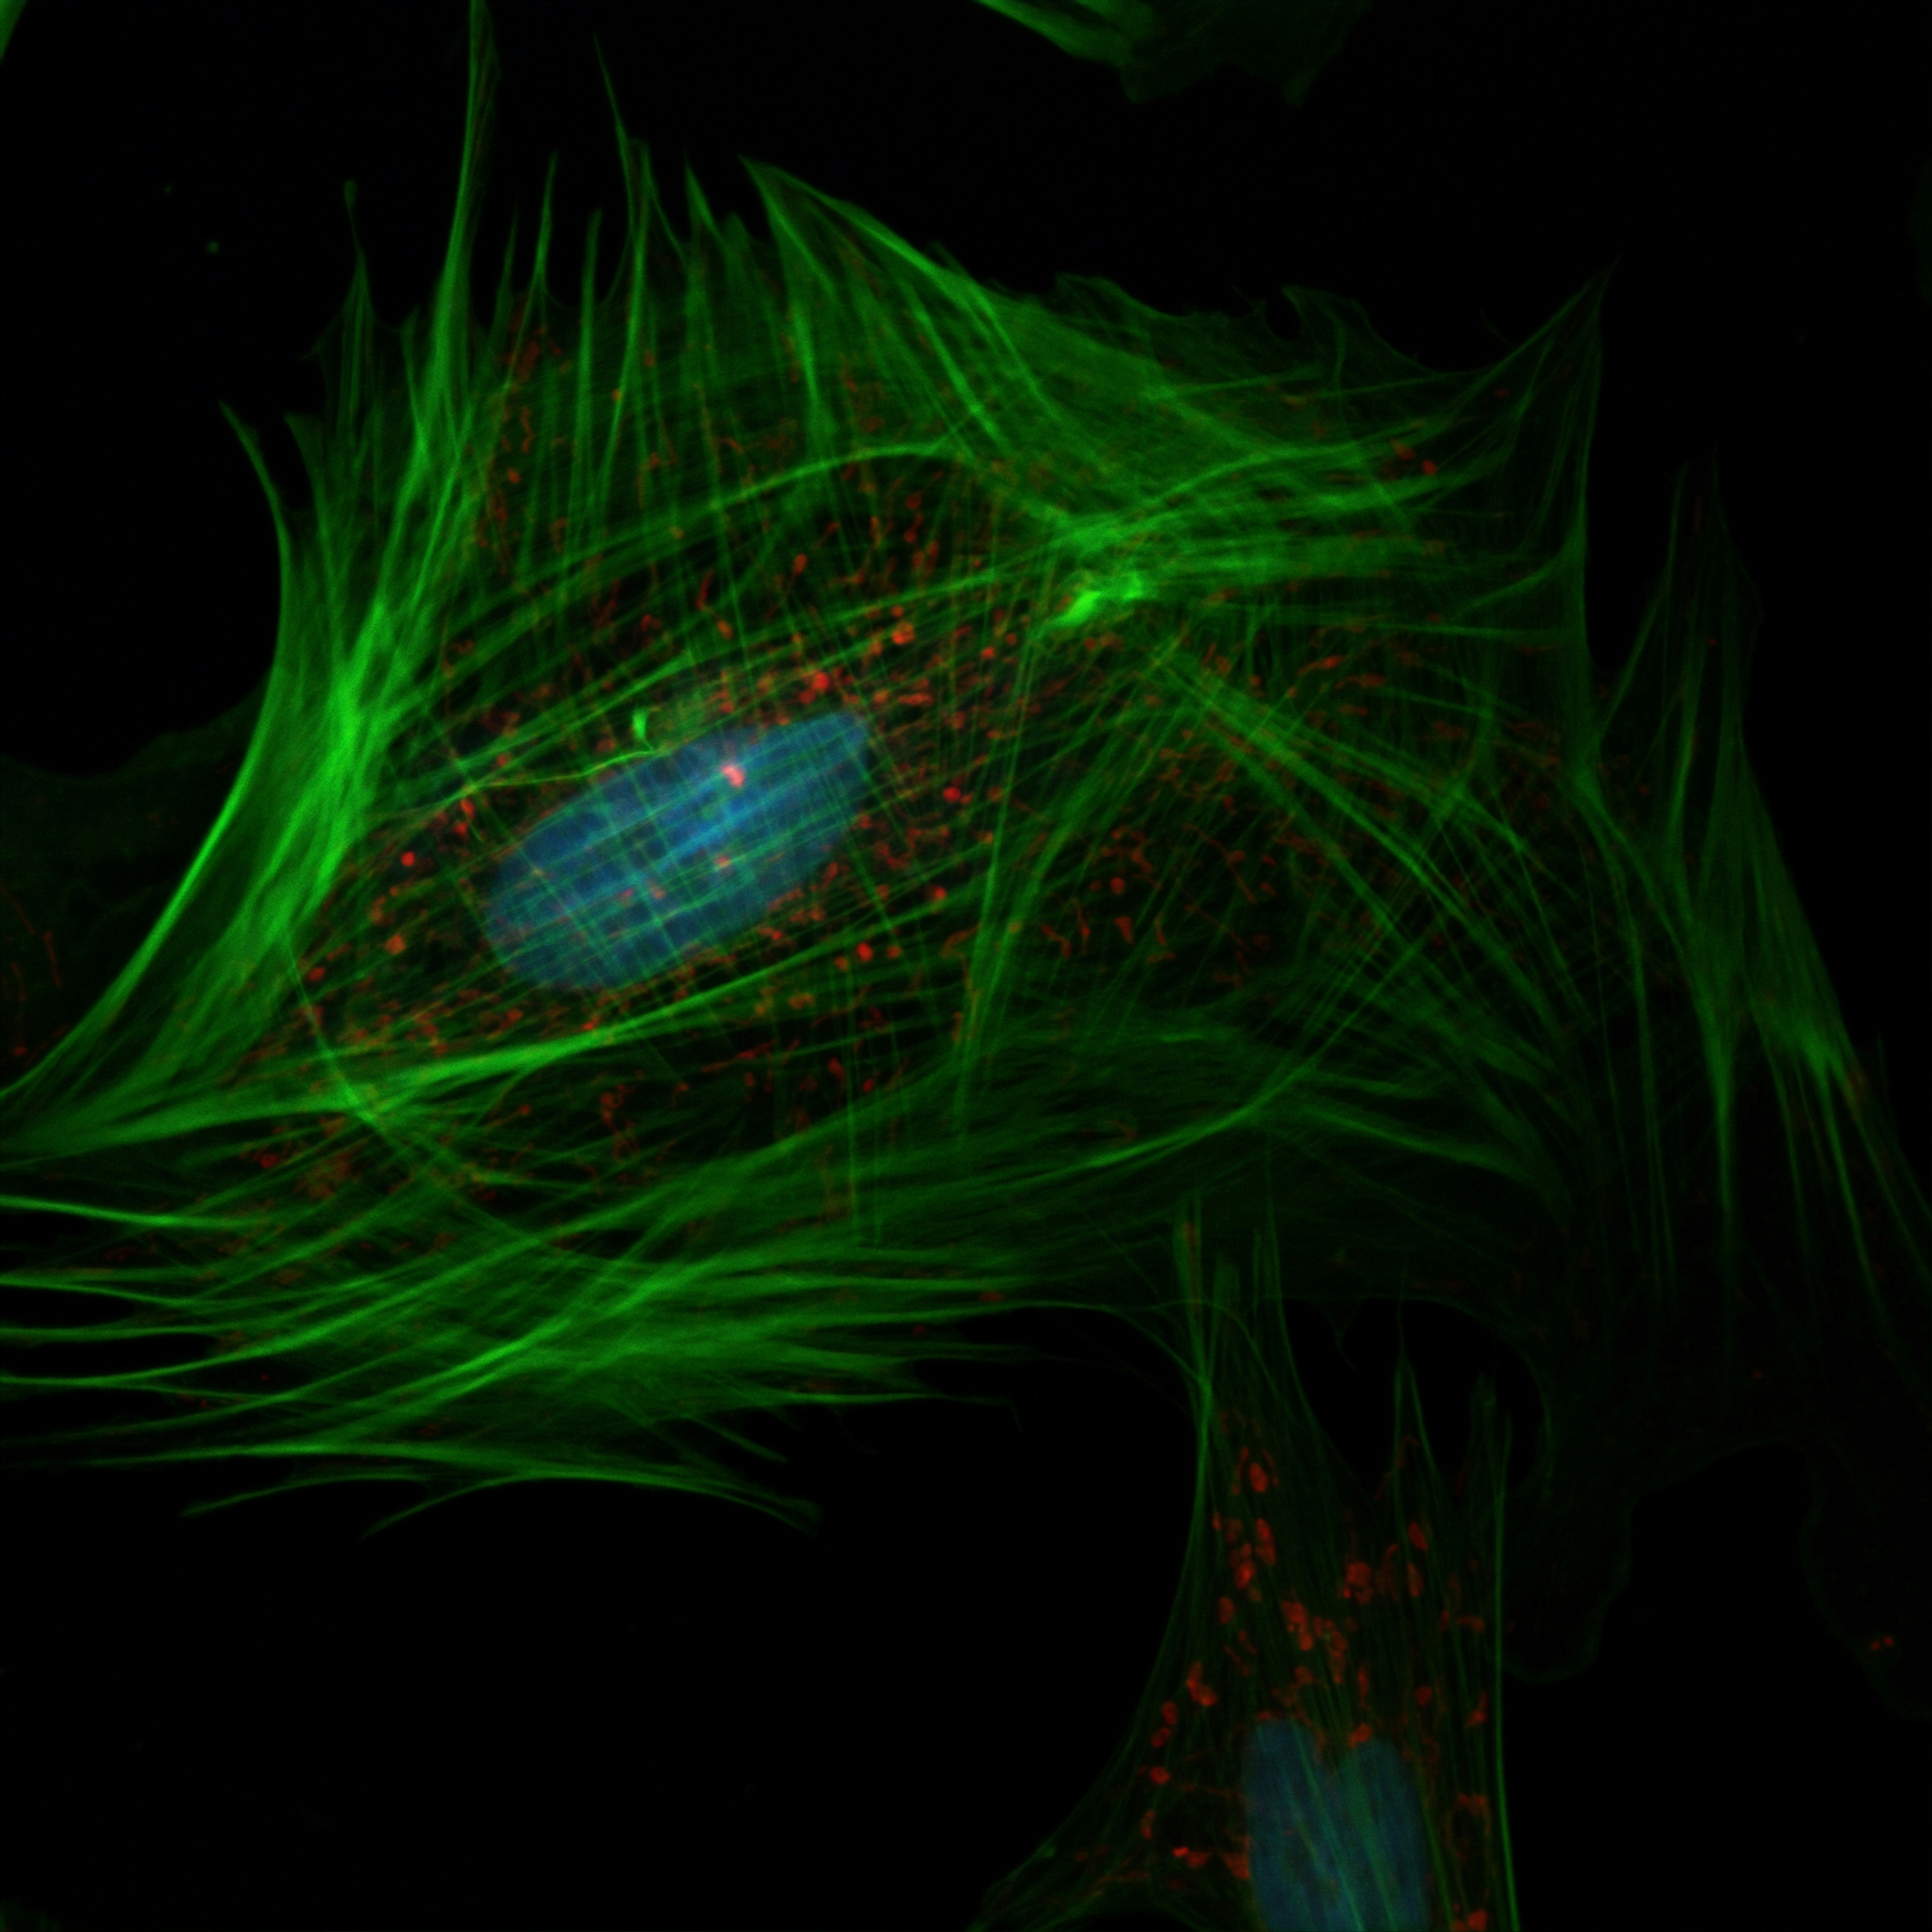 A confocal microscopy image of a fibroblast showing the nucleus (blue), mitochondria (red), and actin cytoskeleton (green). As is evident from their large number of mitochondria, fibroblasts are very metabolically active, continuously synthesizing elements of the extracellular matrix and collagen. Tissue damage is a major trigger for the activation of fibroblasts from fibrocytes, and so fibroblasts play an important role in wound healing. Fibroblast assays are currently being studied as a means of predicting how normal tissue may respond to radiation therapy in cancer patients and others. 